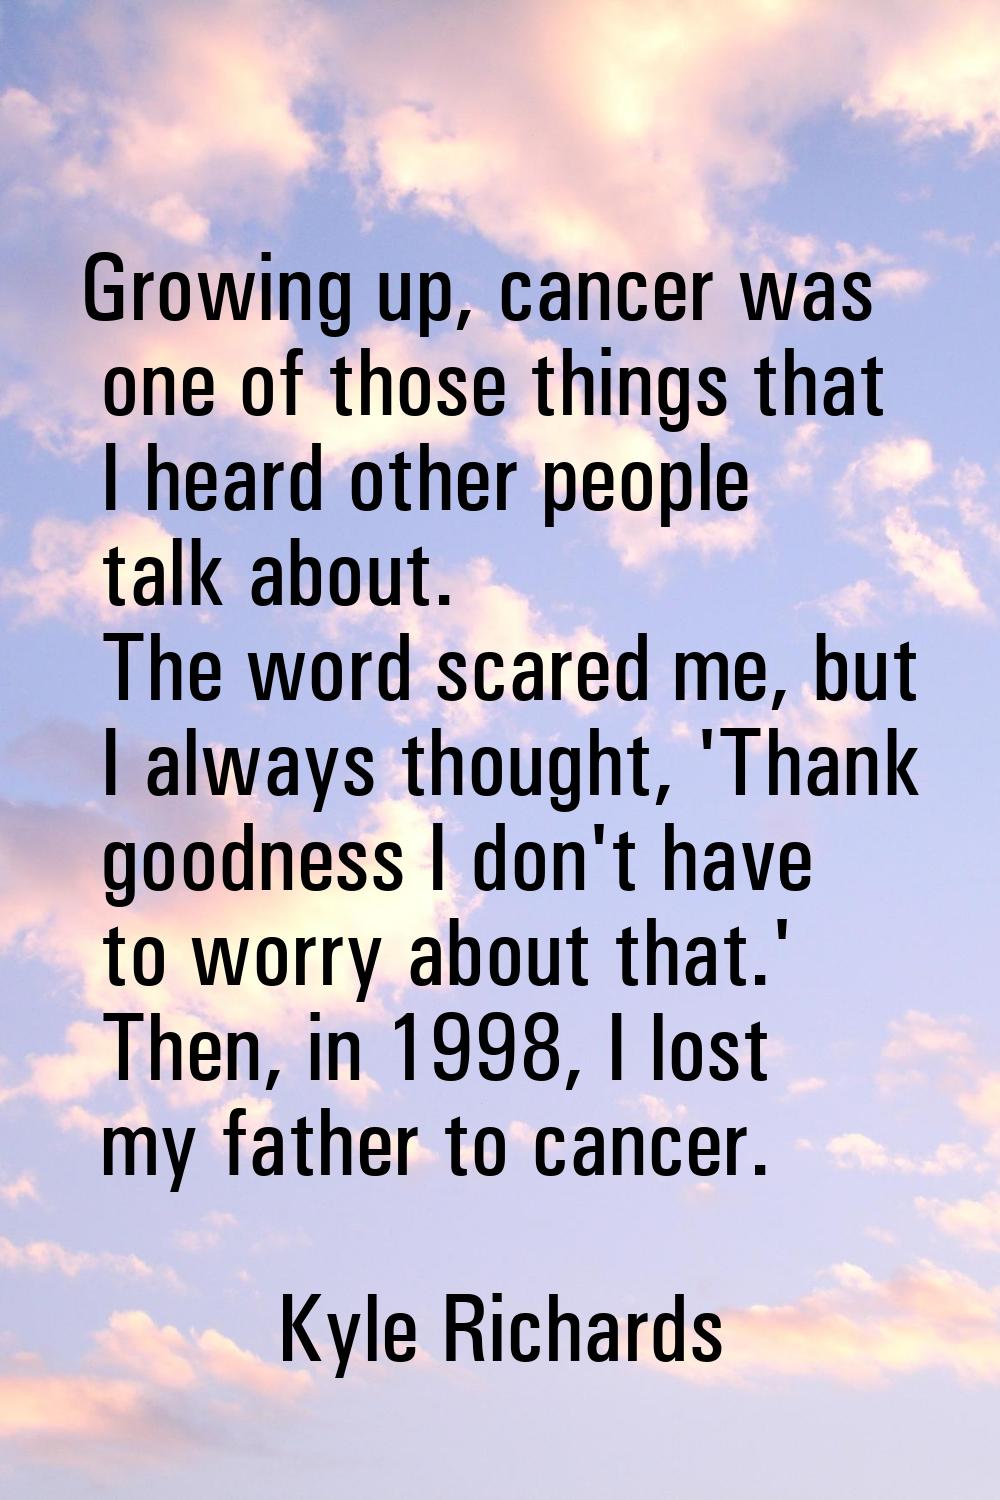 Growing up, cancer was one of those things that I heard other people talk about. The word scared me